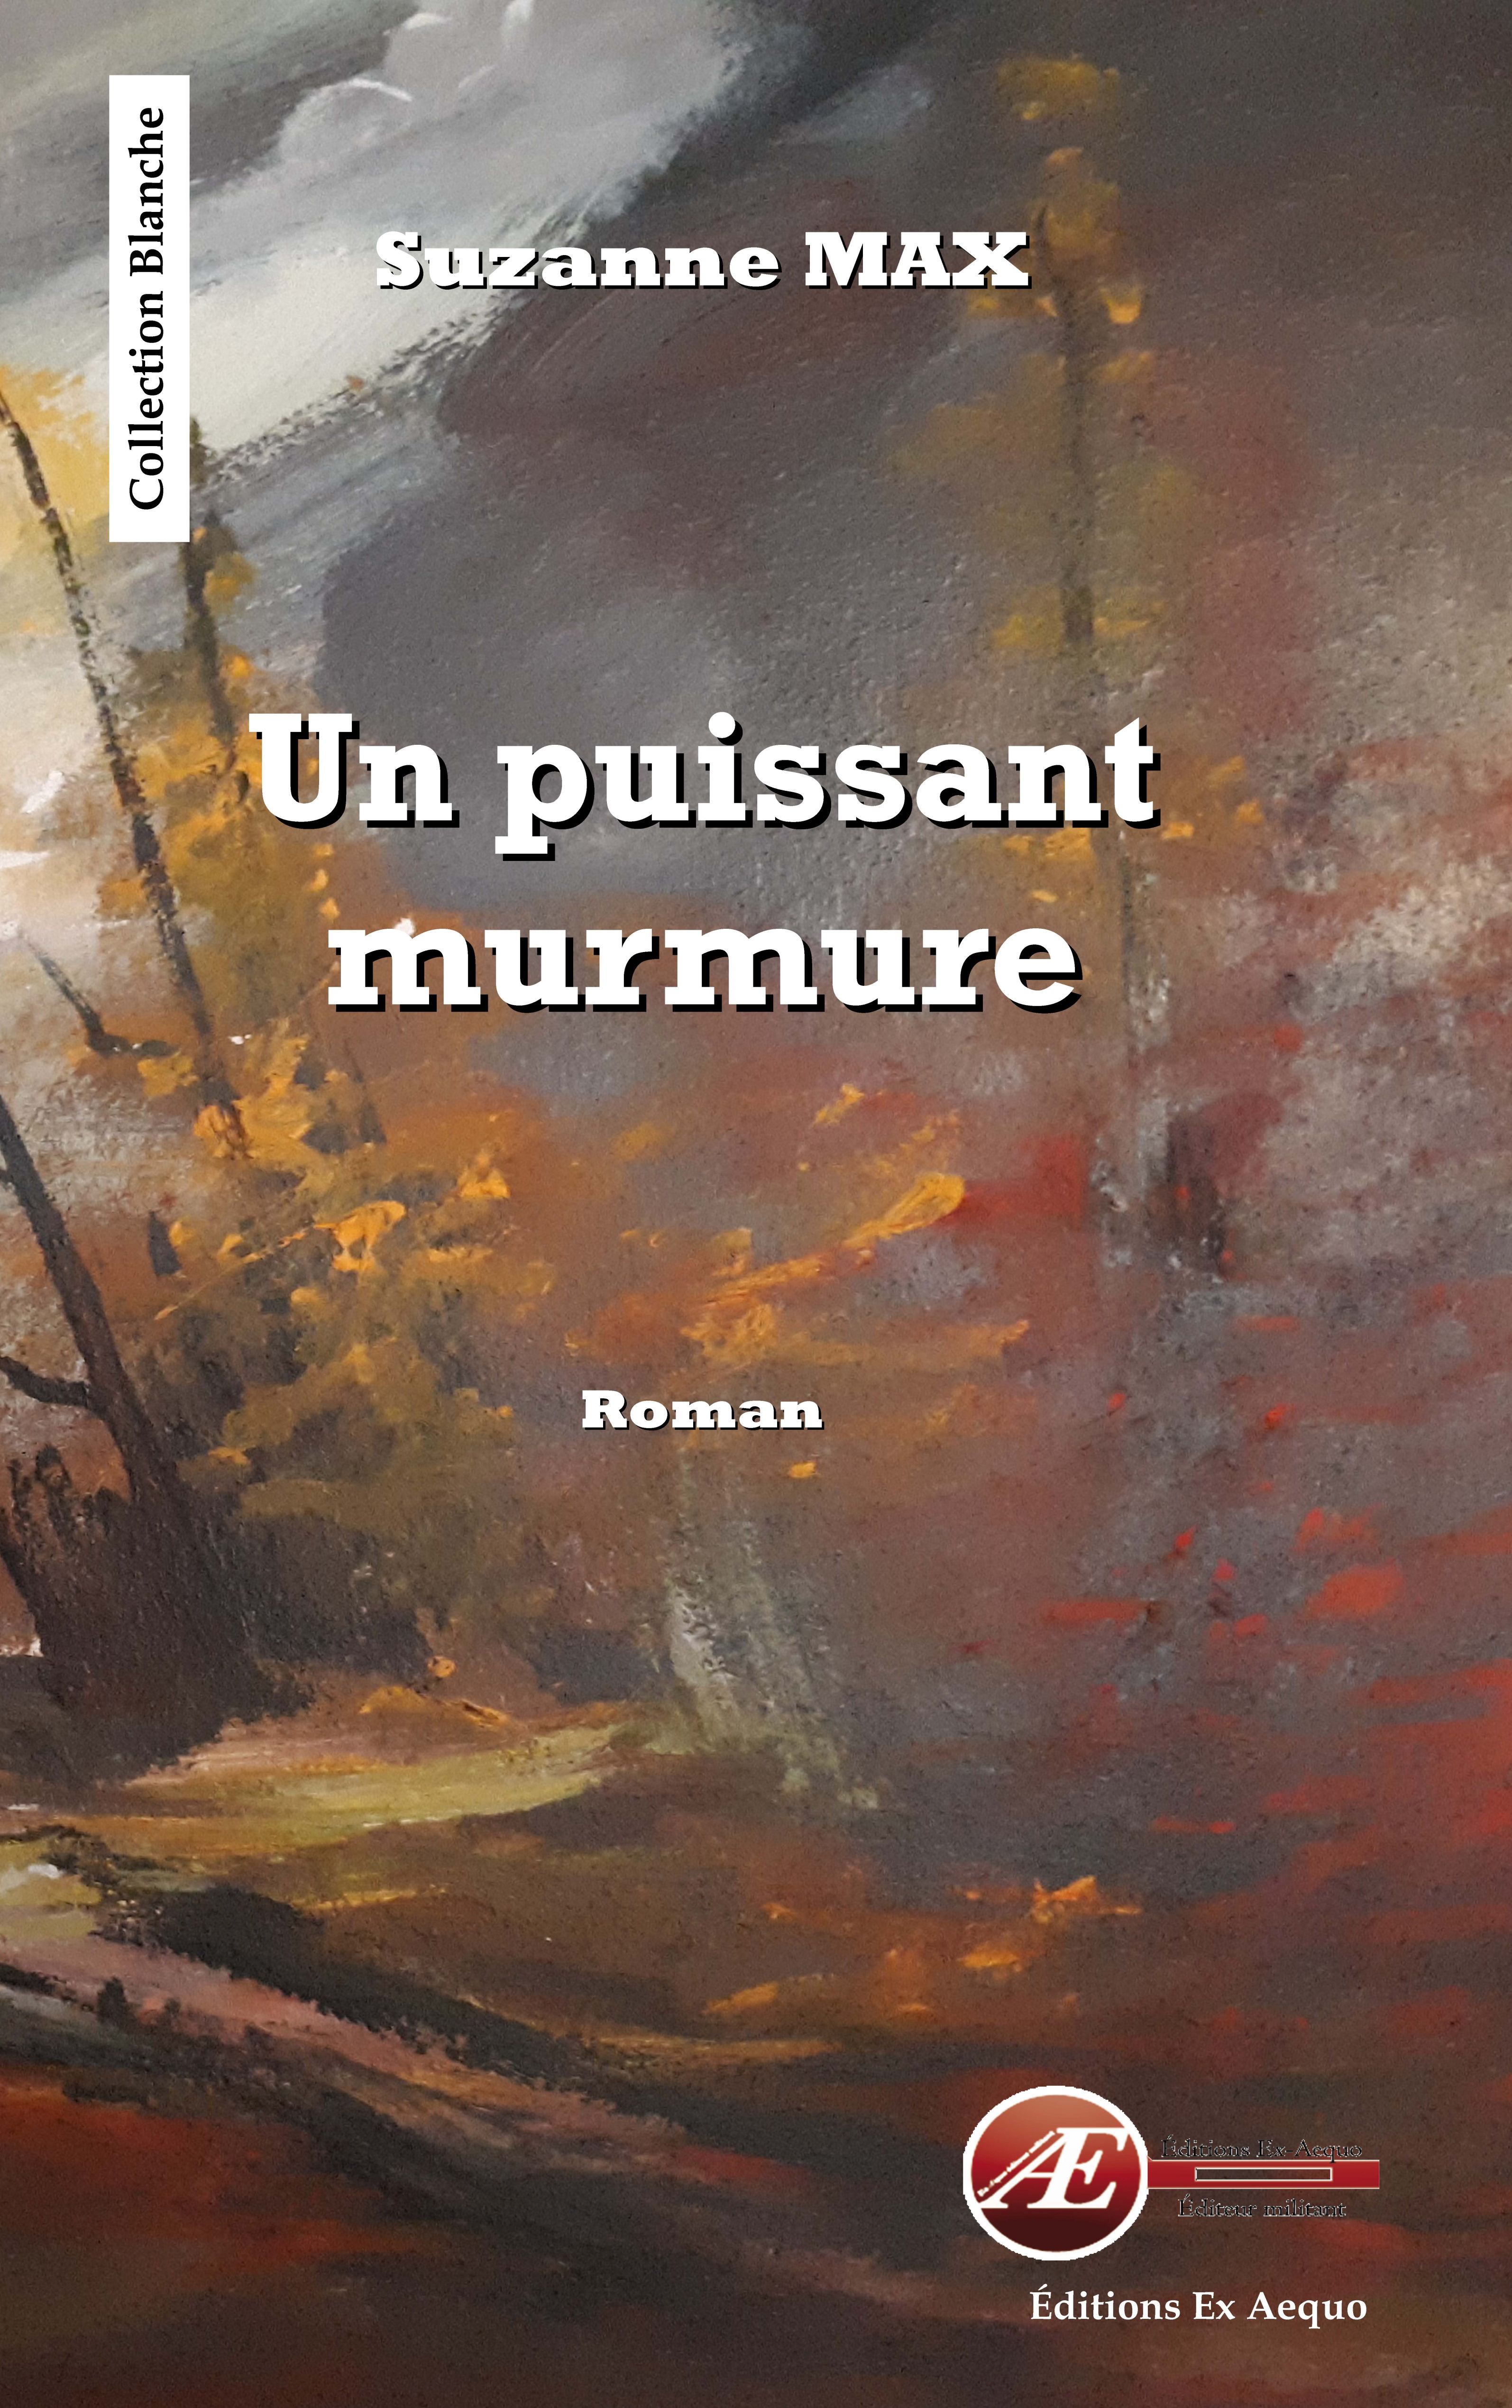 You are currently viewing Un puissant murmure, de Suzanne Max